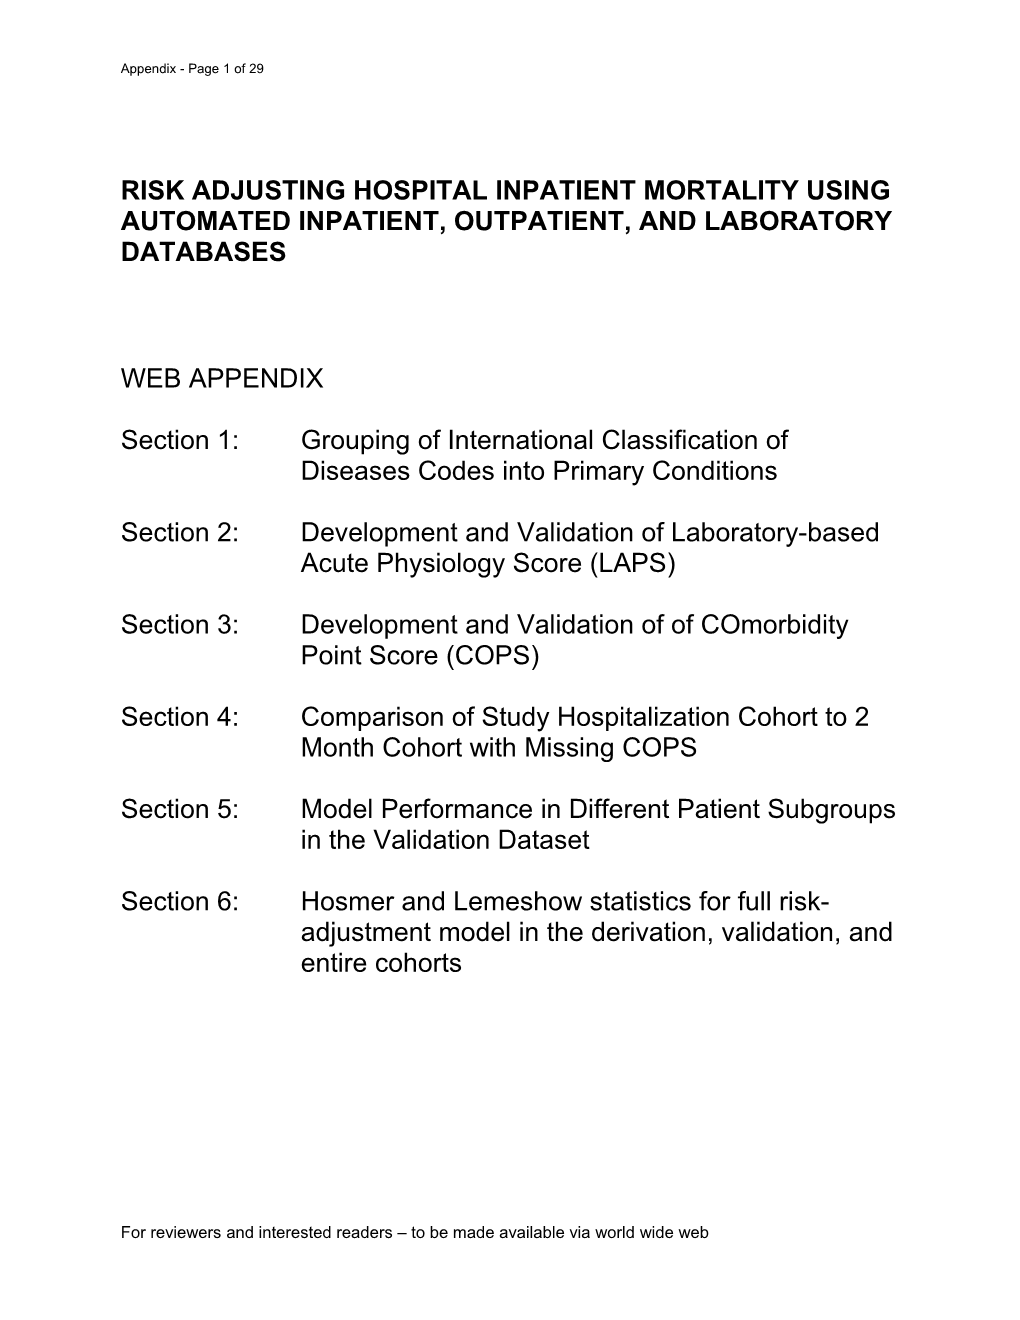 Risk Adjusting Hospital Inpatient Mortality Using Automated Inpatient, Outpatient, And